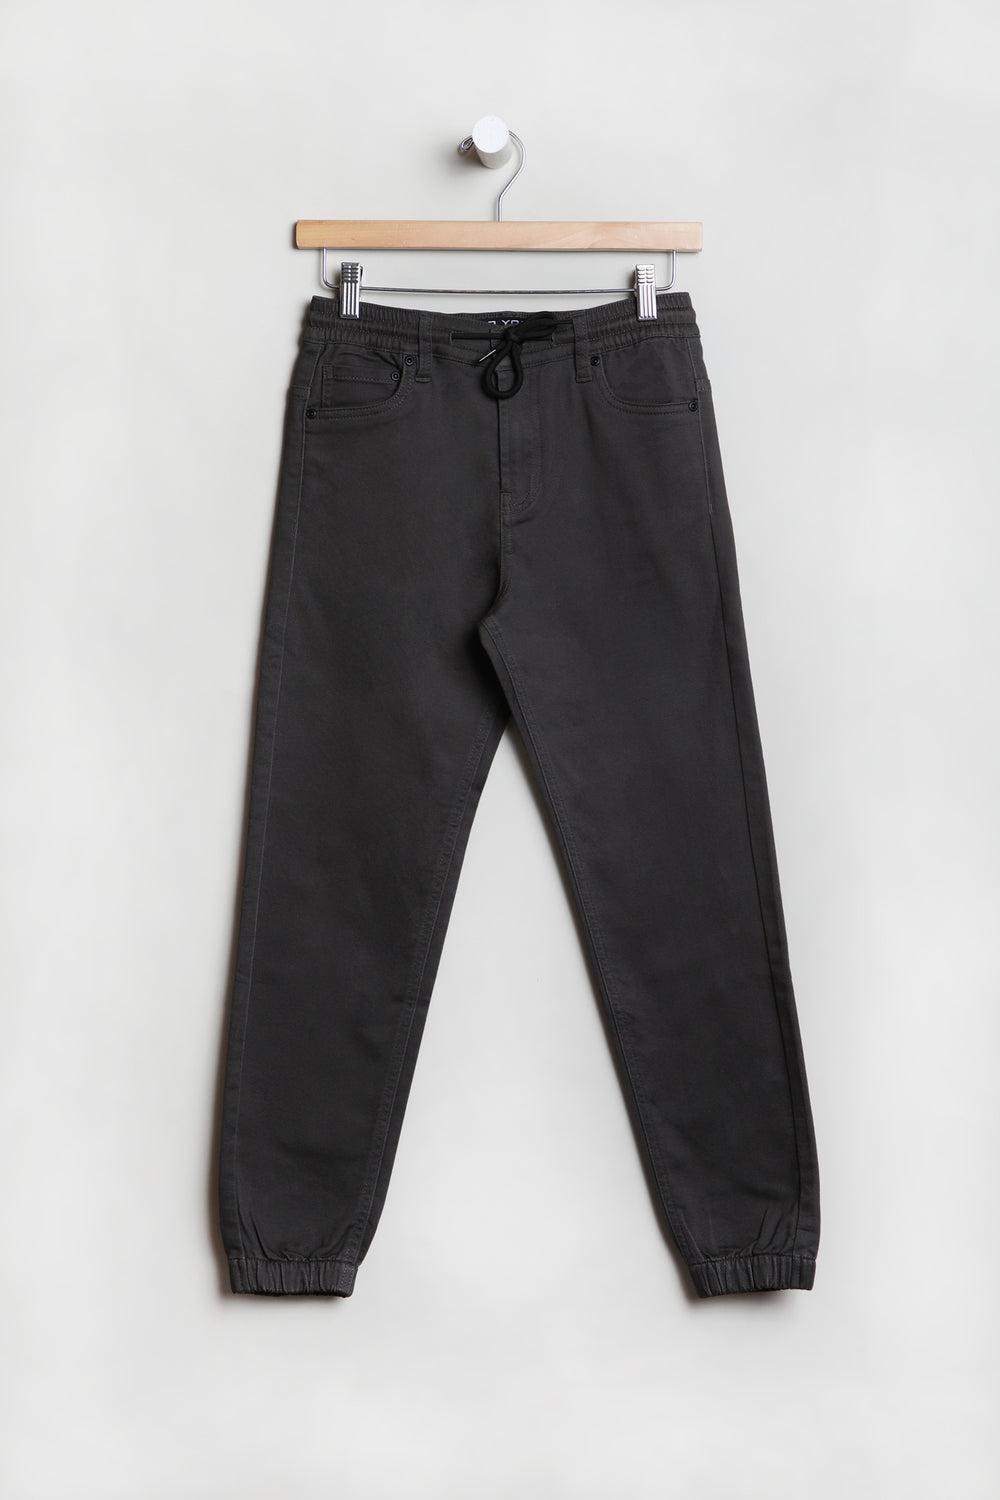 Zoo York Youth Soft Denim Relaxed Jogger Zoo York Youth Soft Denim Relaxed Jogger